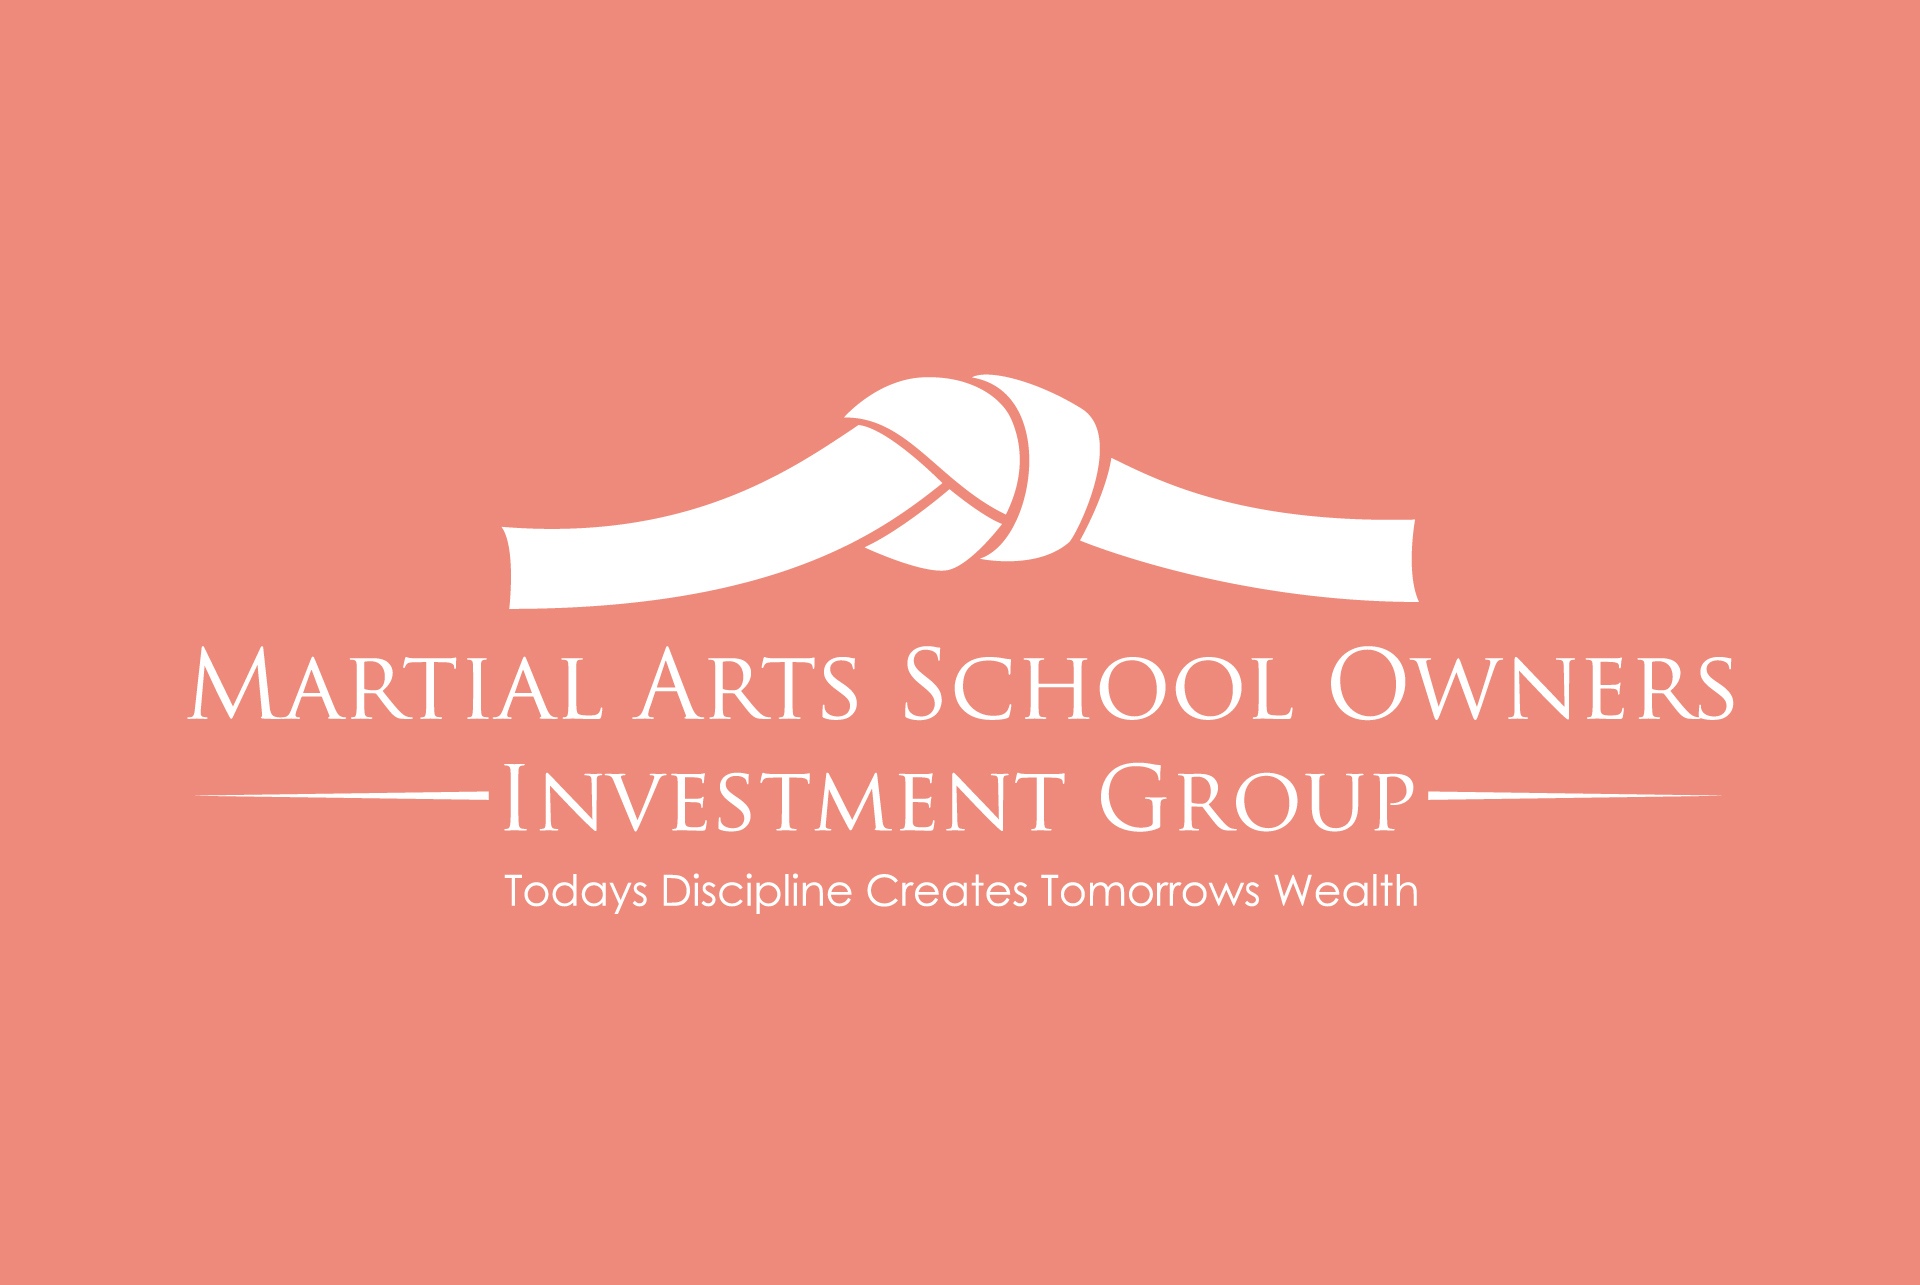 Martial Arts School Owners Investment Group